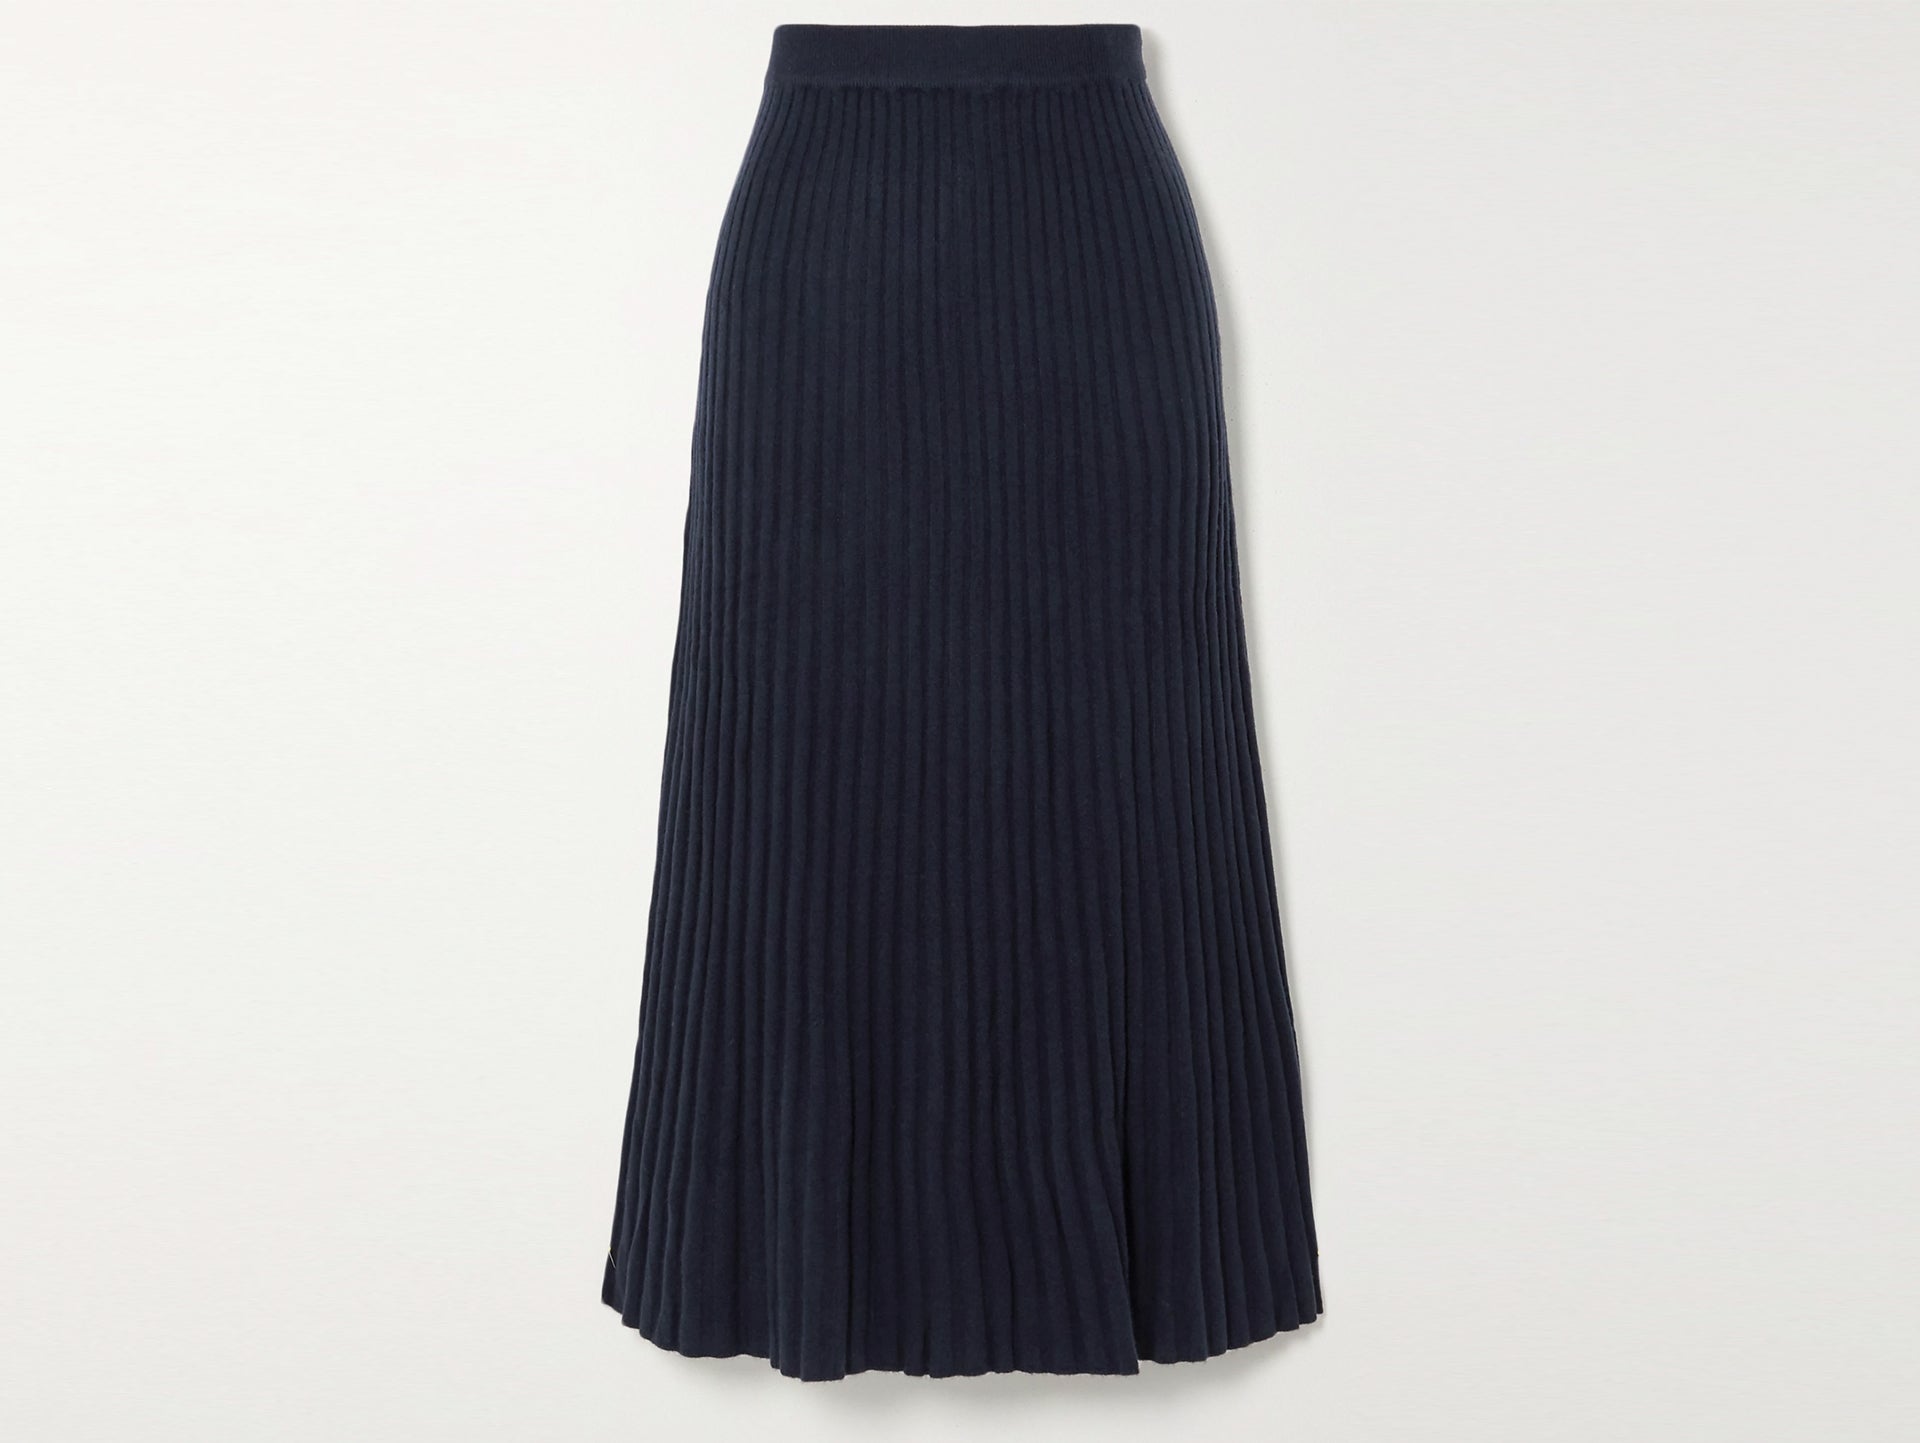 ARCH4 - Sustainable Fashion - Ribbed cashmere midi skirt